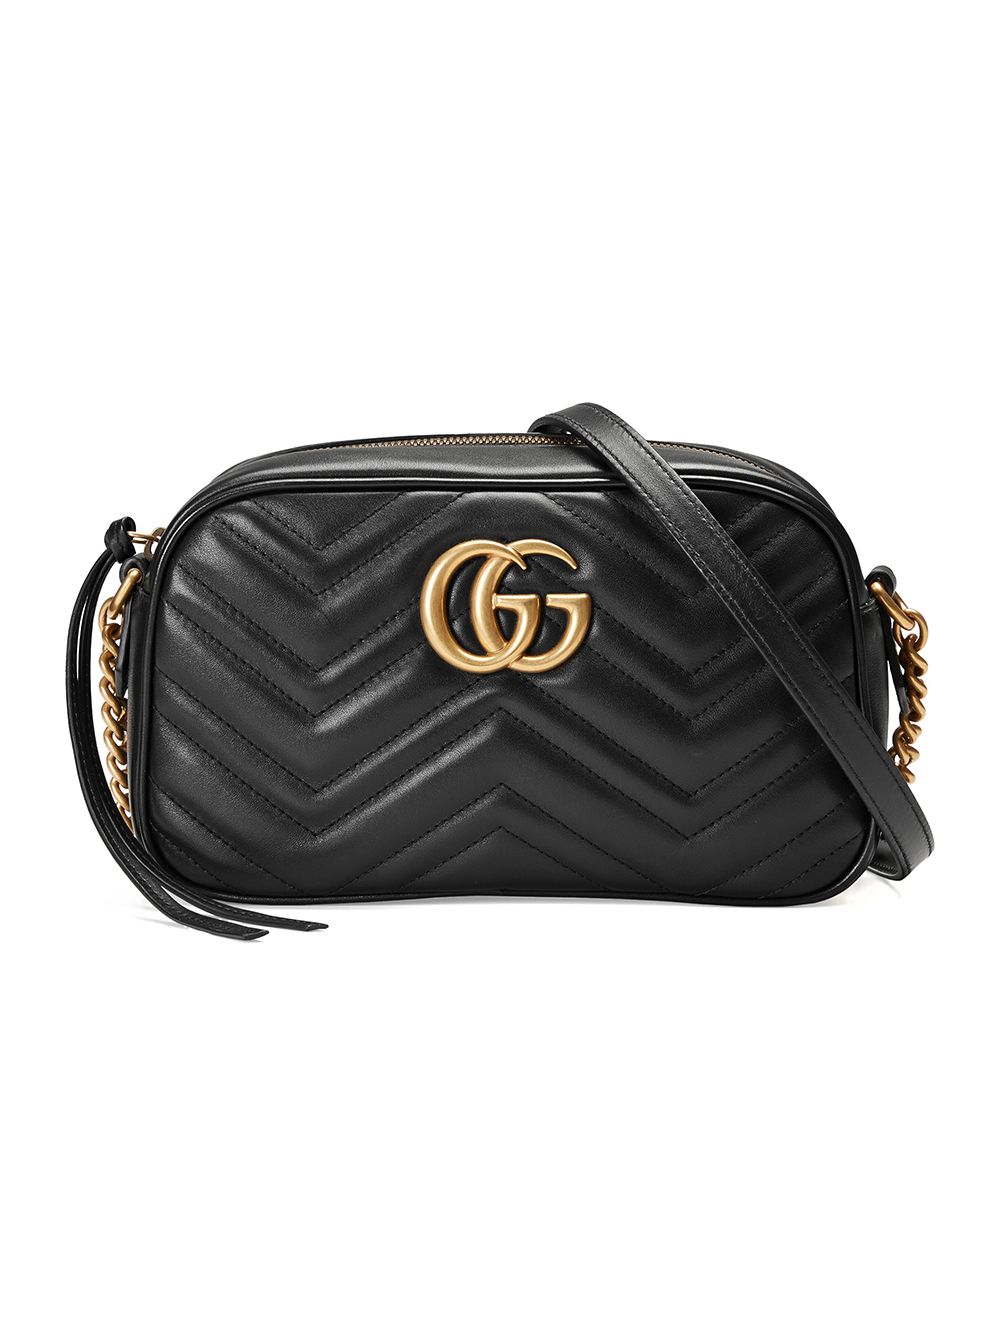 Gucci GG Marmont Small Matelassé Shoulder Bag with Bamboo Handle